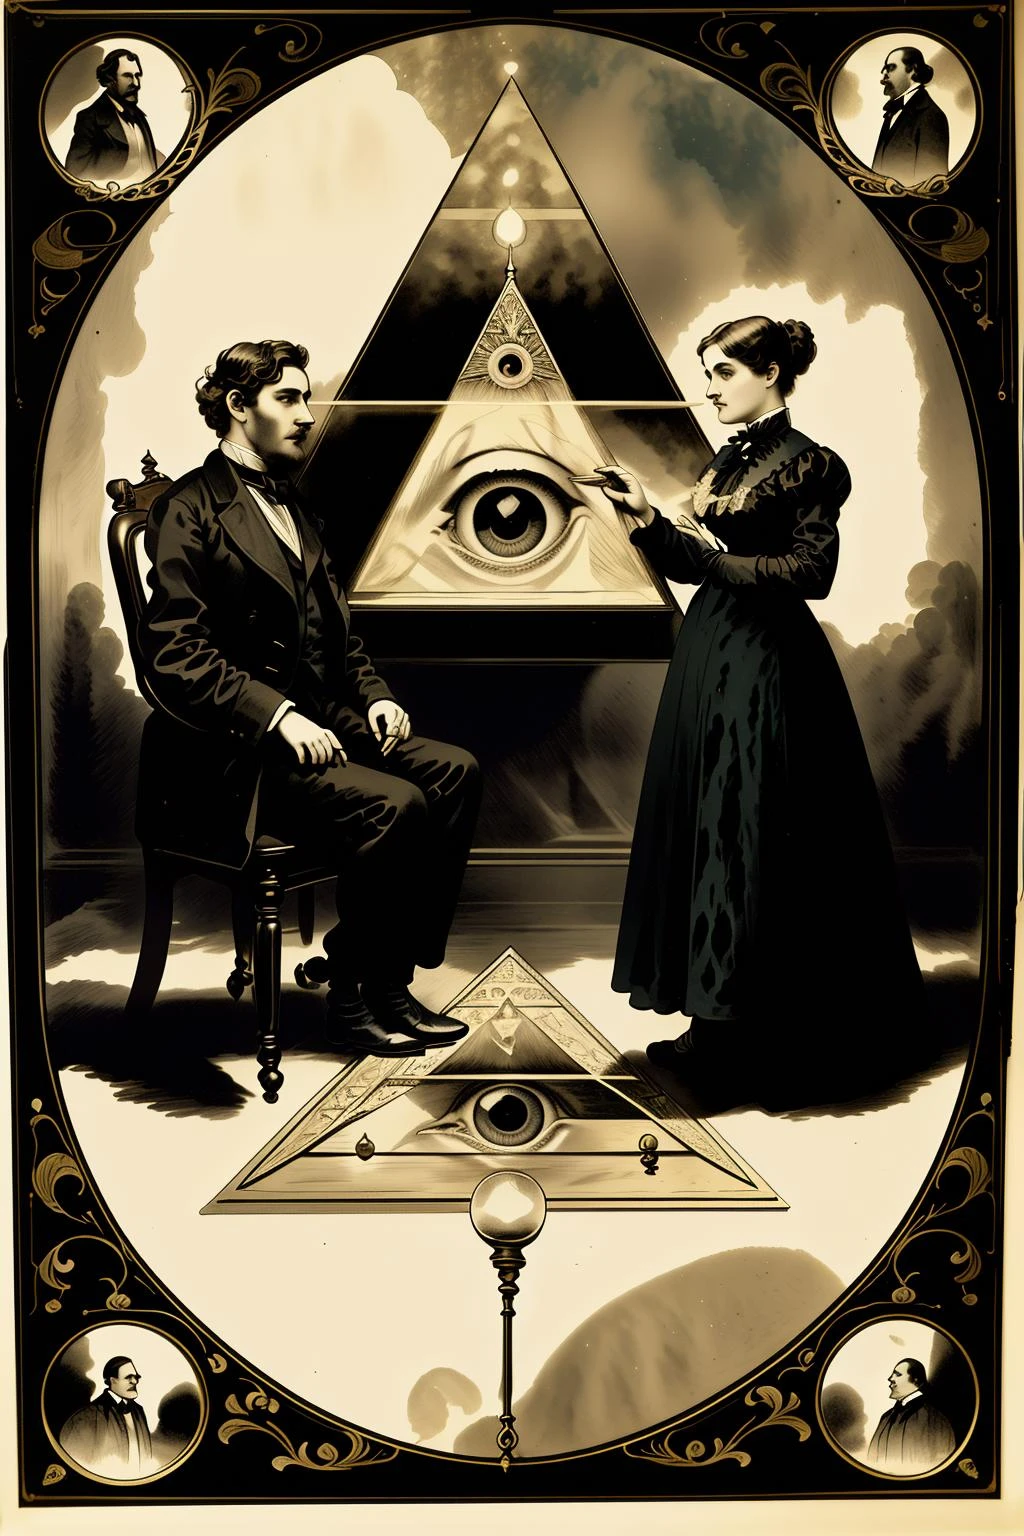 a วิคตอเรียน  poster advertising a  a painting of two people sitting on a rug in front of a pyramid with an eye in the center of the image and a third person standing on the floor , 1800, ชาร์ลส แม็กออลีย์, ตั้งขึ้นในปี พ.ศ. 2403, ซิลค์สกรีน, โรงเรียนอเมริกันบาร์บิซอน,  วิคตอเรียน_ลึกลับ , (( วิคตอเรียน style graphic ))